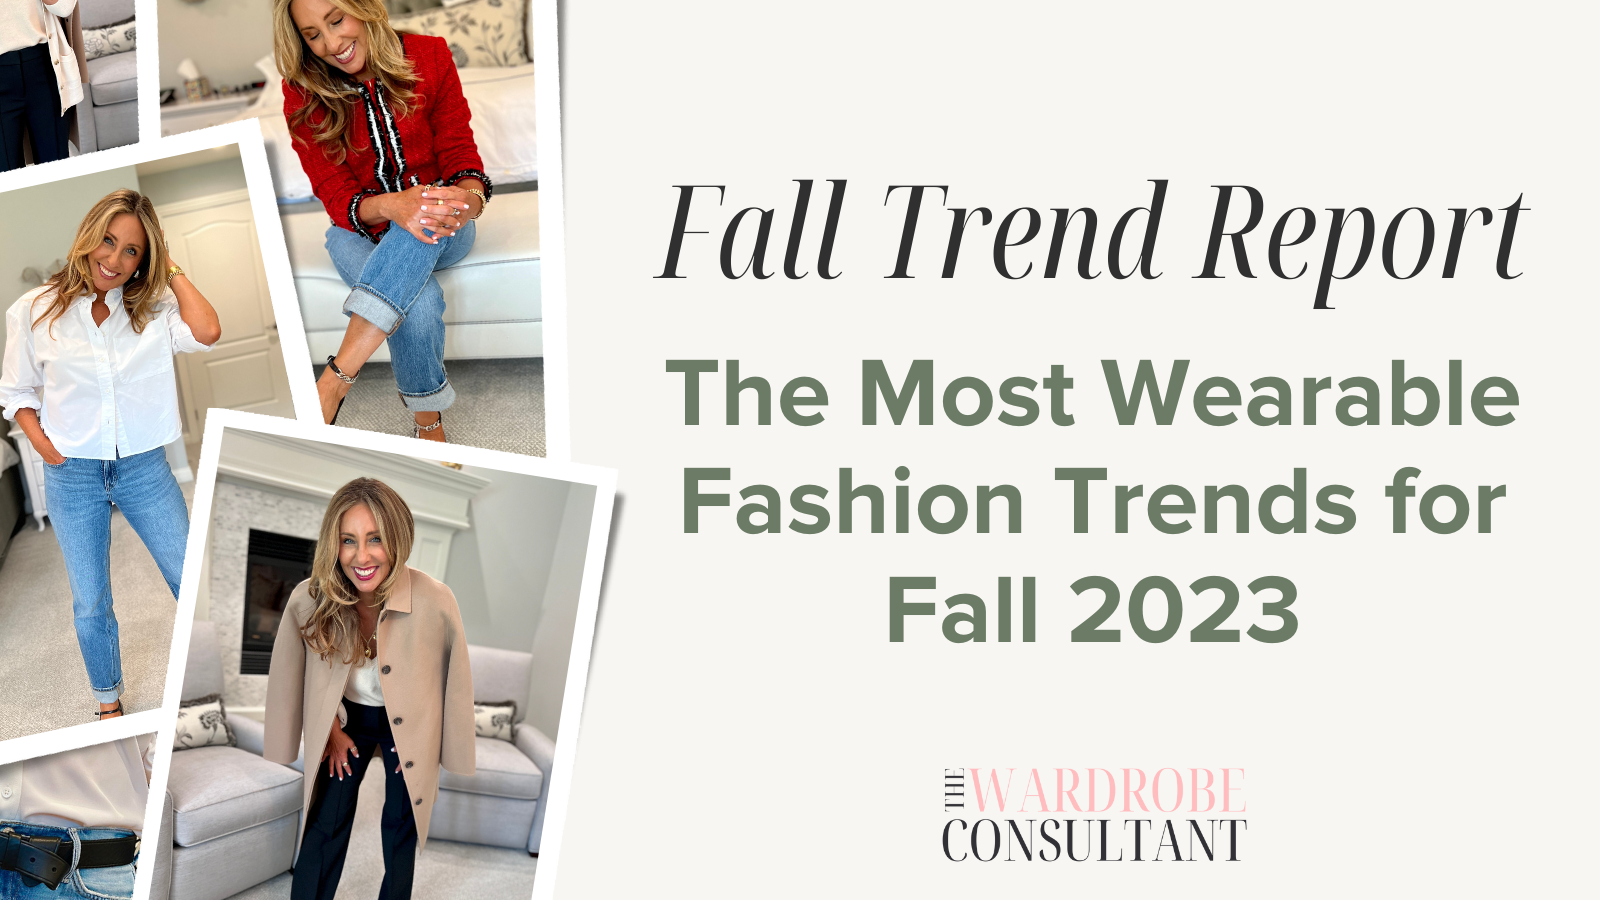 The Most Wearable Fall Fashion Trends for 2023 — The Wardrobe